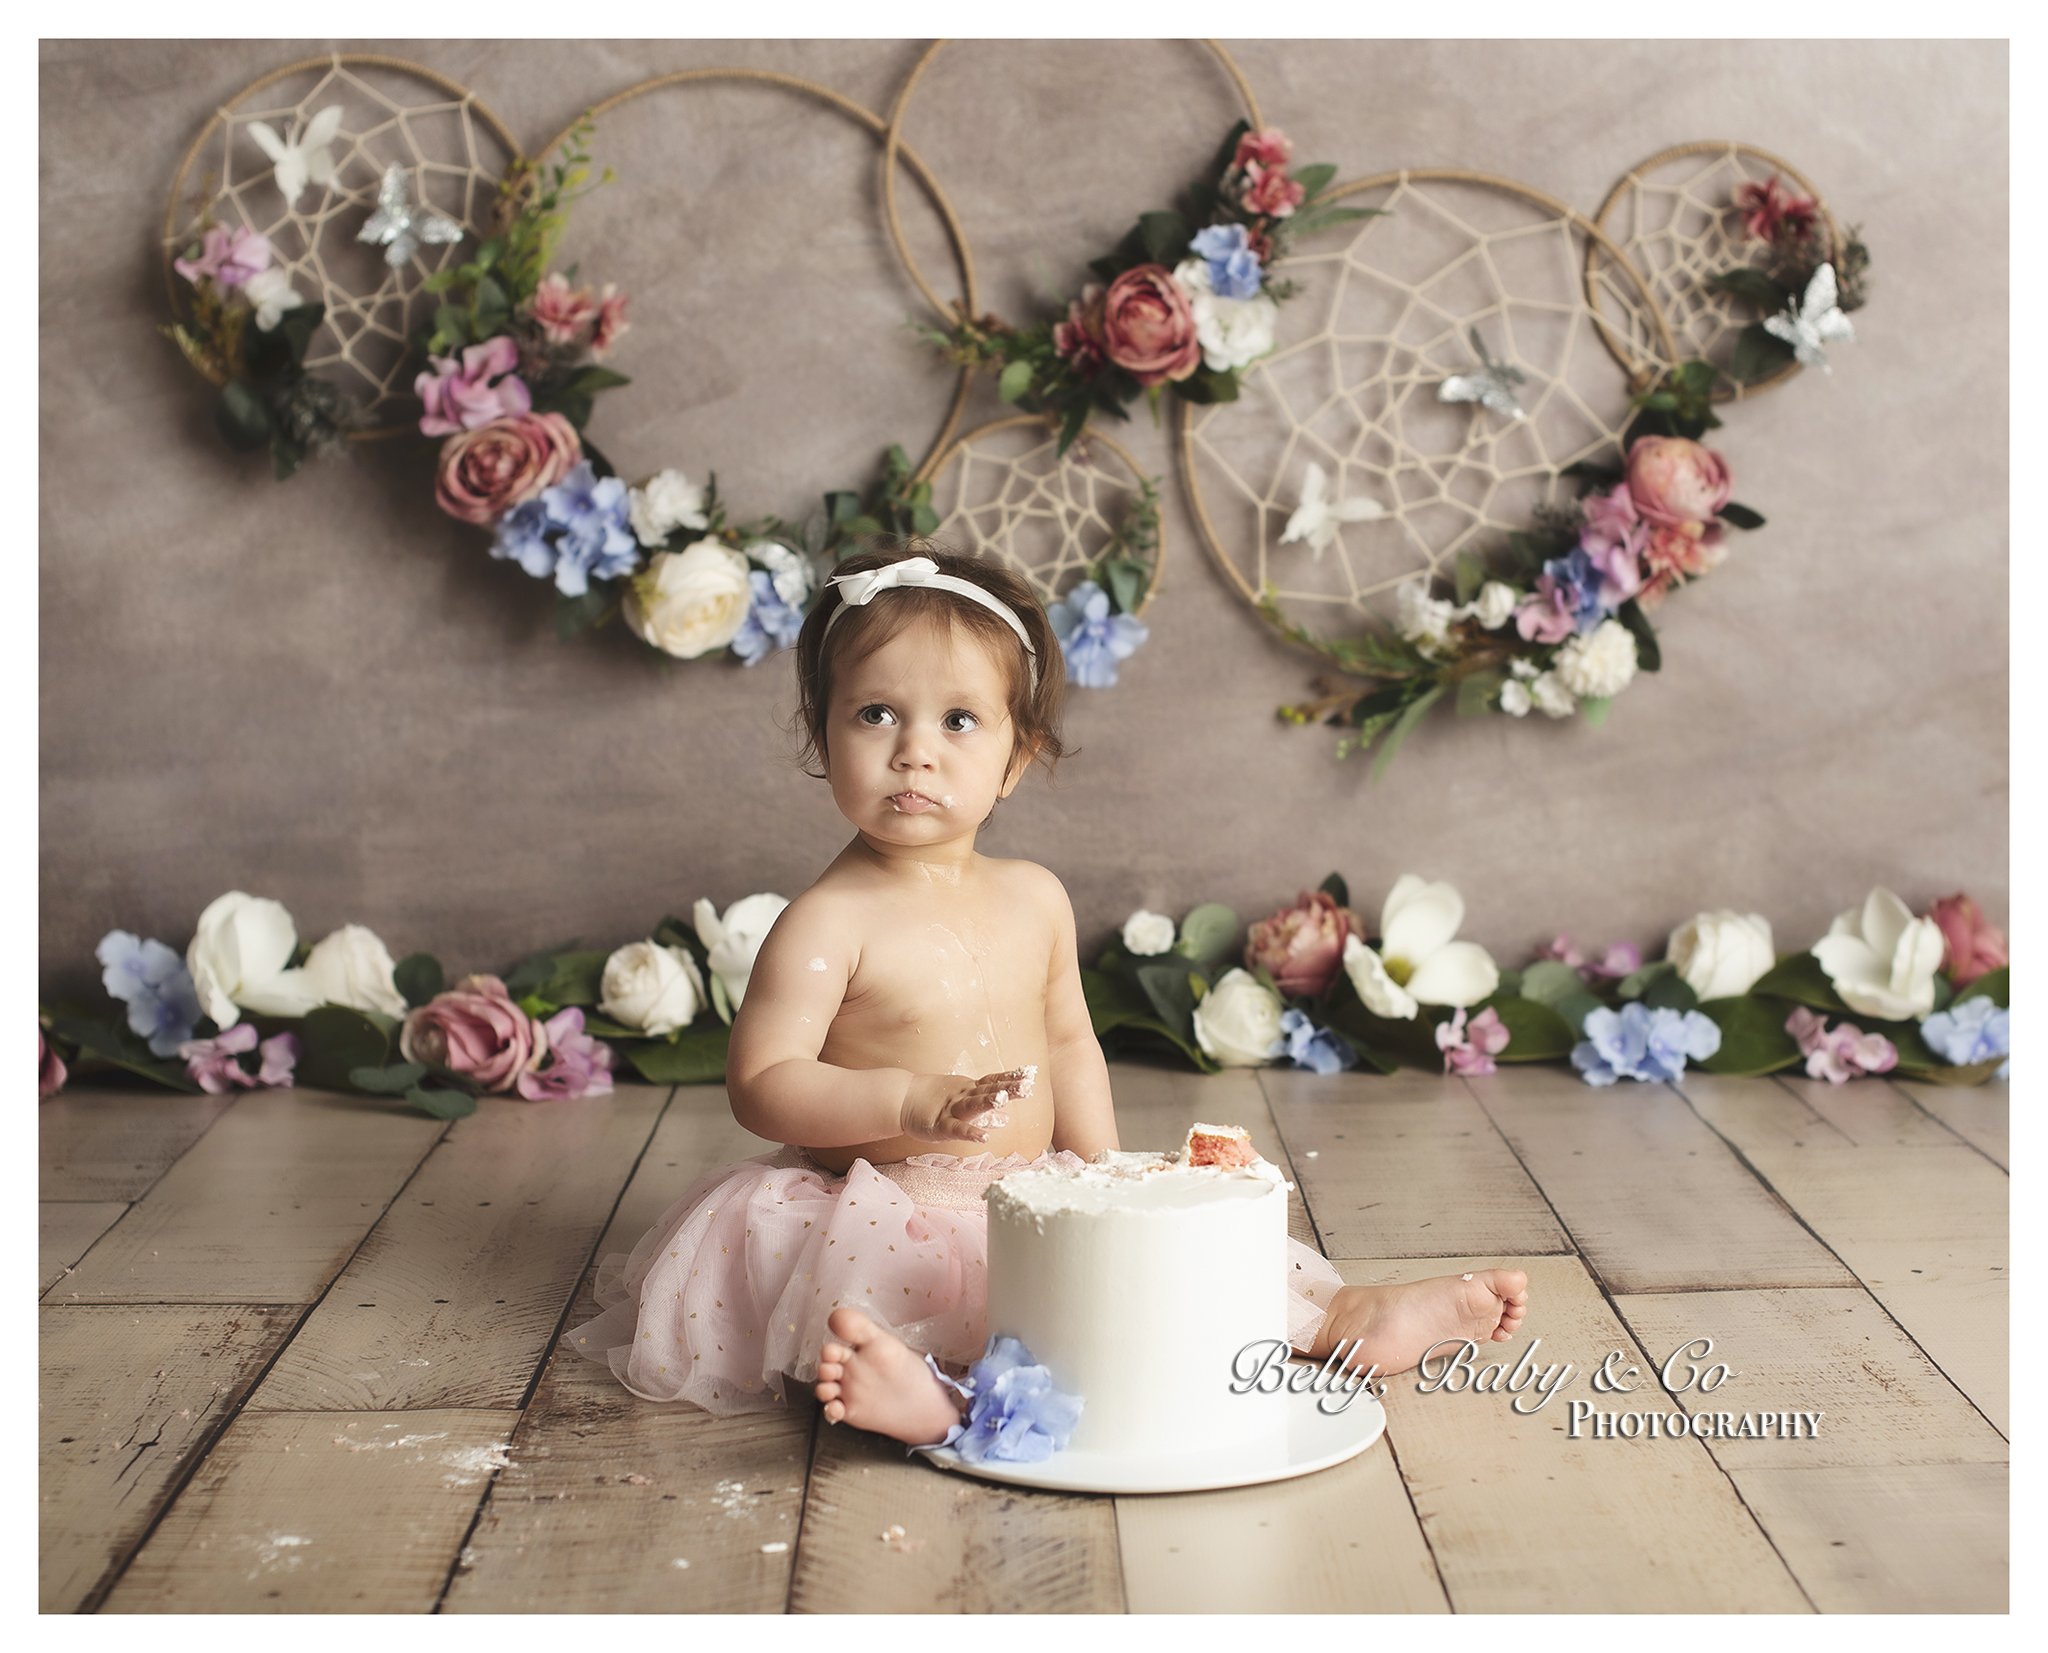 Belly Baby Co Photography 3 Top 10 Best Cake Smash Photographers in the World - 35